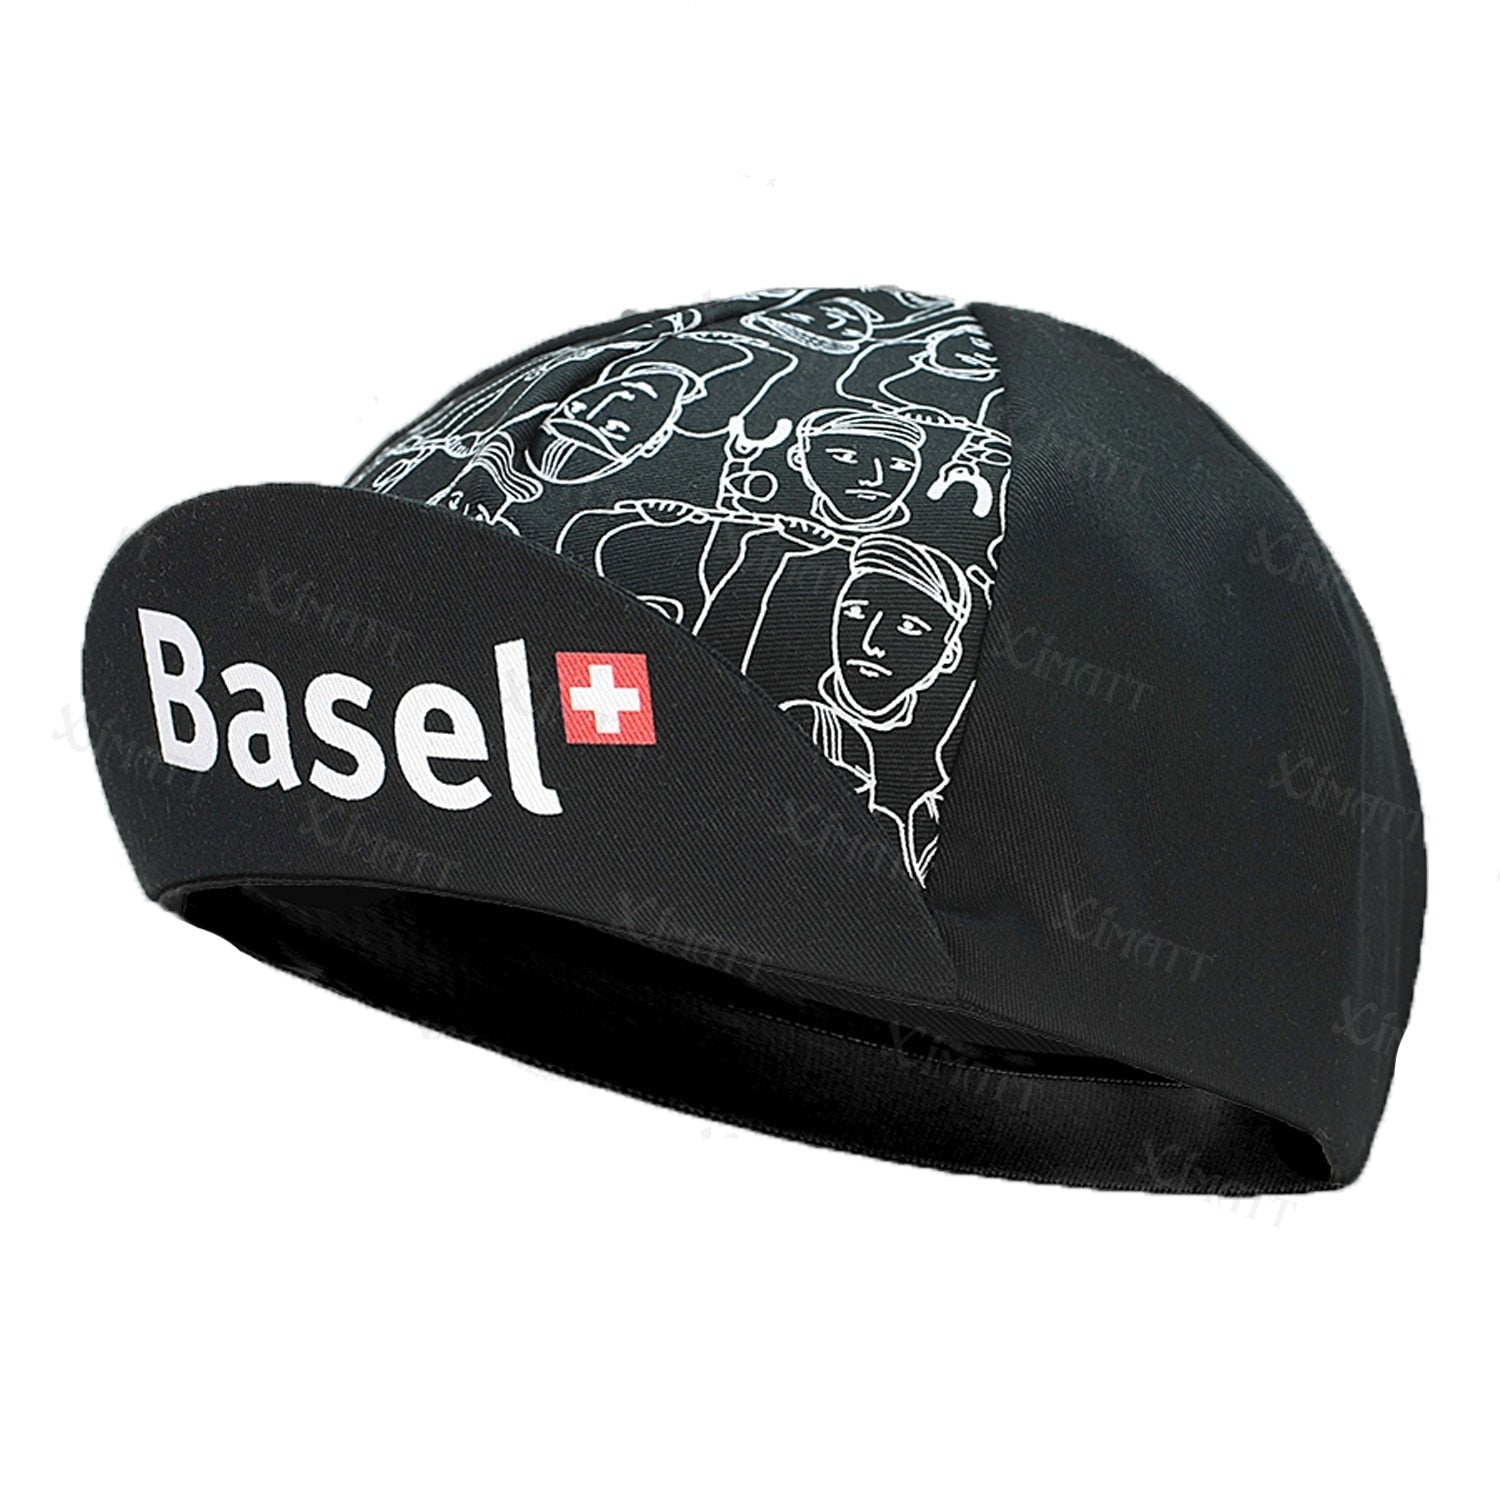 Black Series Most Popular  Polyester Cycling Caps Sports Quick Dry Bicycle Hat Men Women Wear Absorb Sweat Breathable